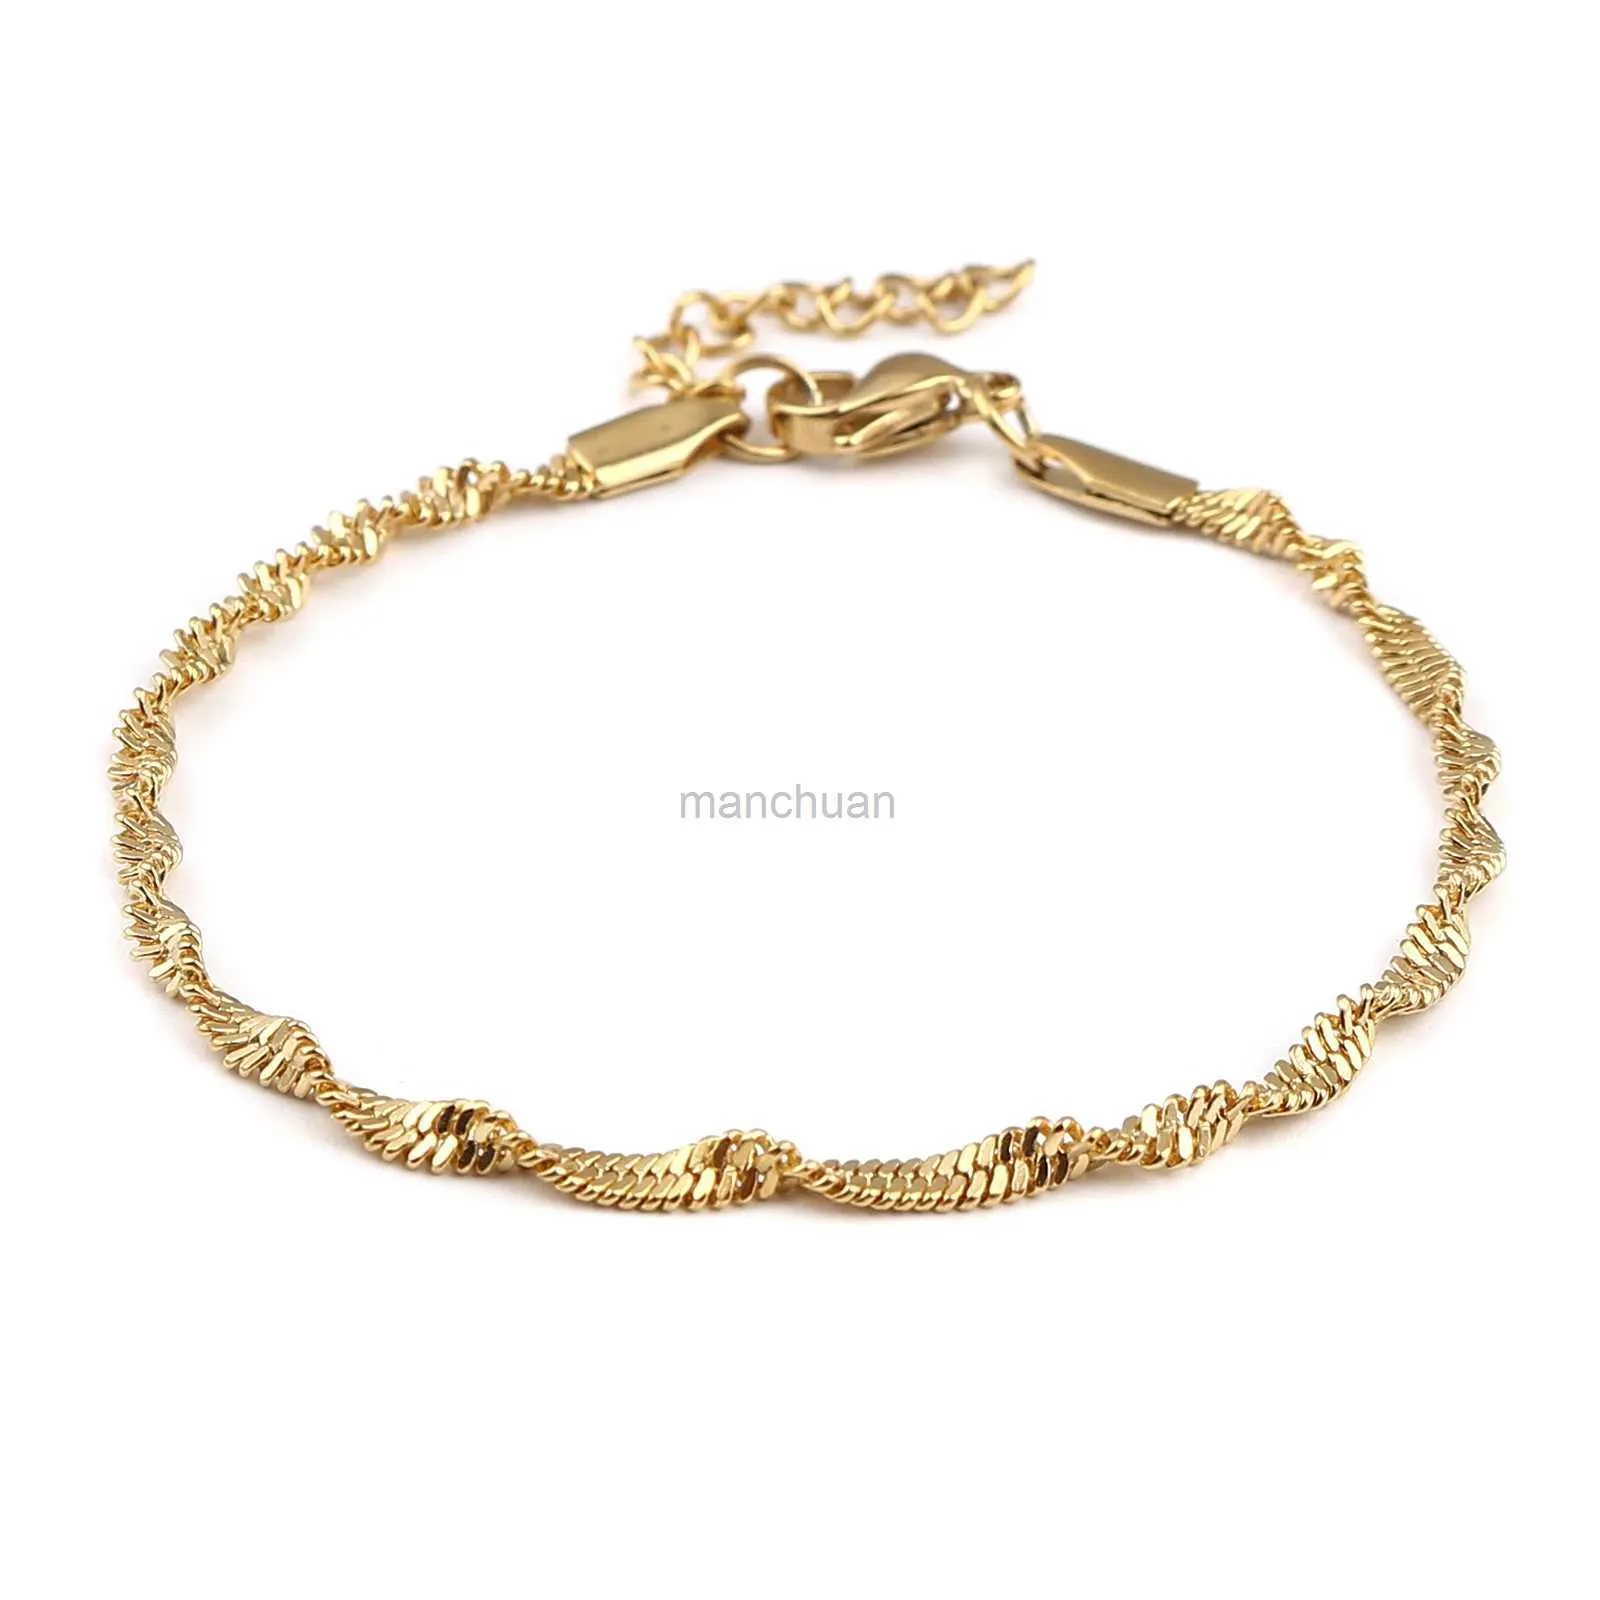 Chain High quality chain bracelet silver stainless steel bracelet anti-corrosion and waterproof 17cm (6 6/8 inches) long 1 piece 240325